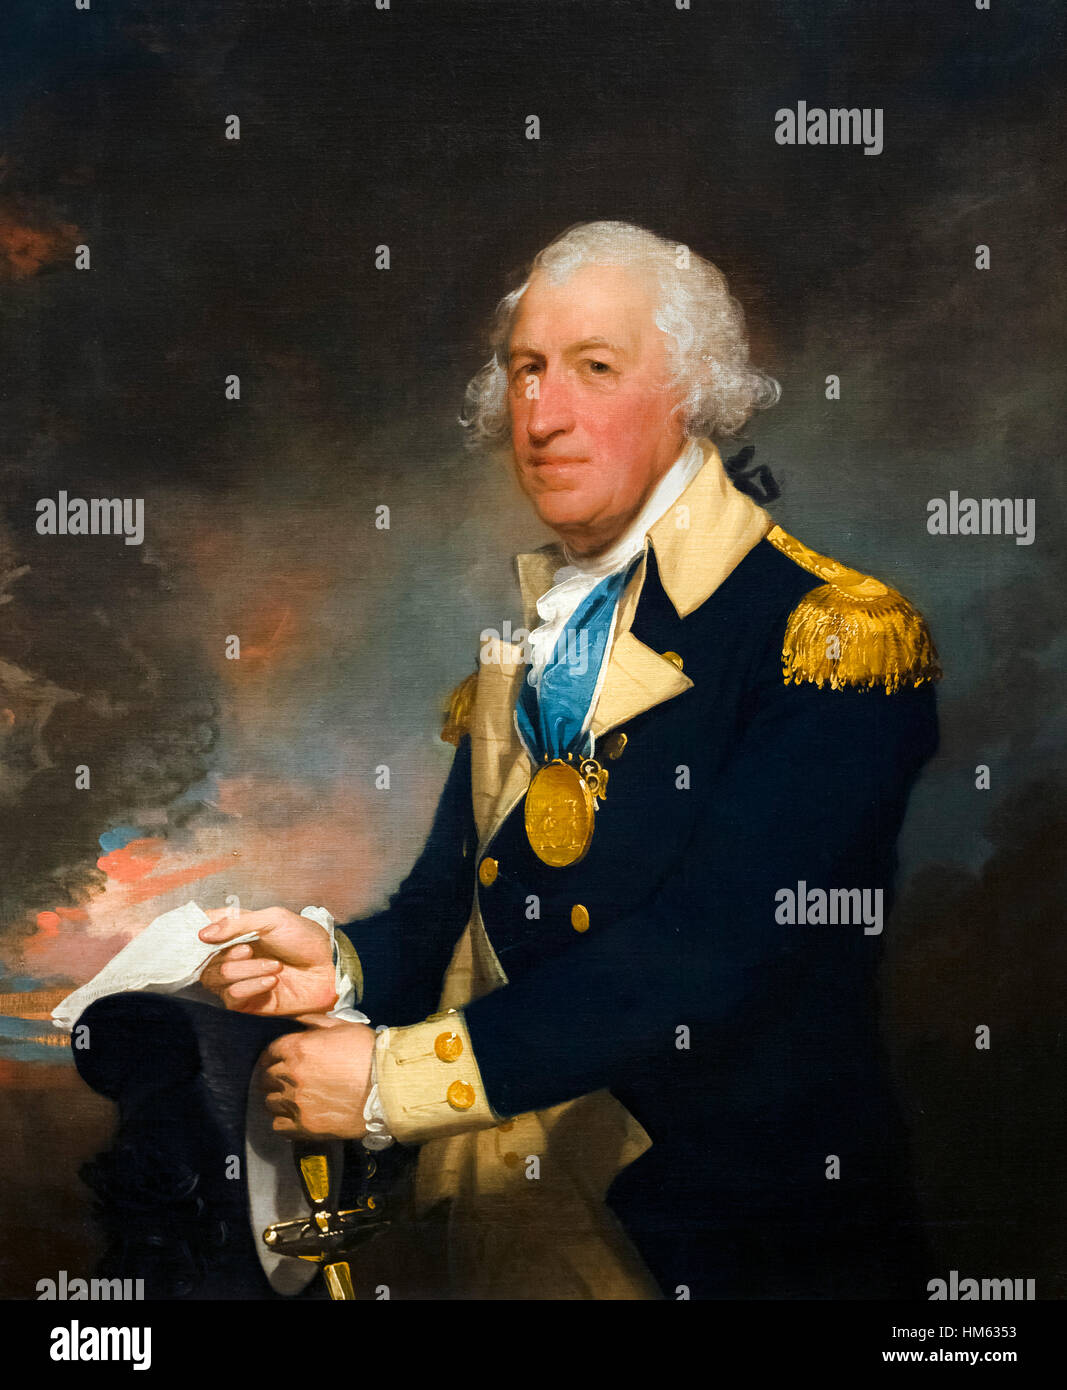 Horatio Gates by Gilbert Stuart, oil on canvas, c.1793-4. General Horatio Gates was an American general during the War of Independence and is famous for victories at the Battles of Saratoga. Stock Photo